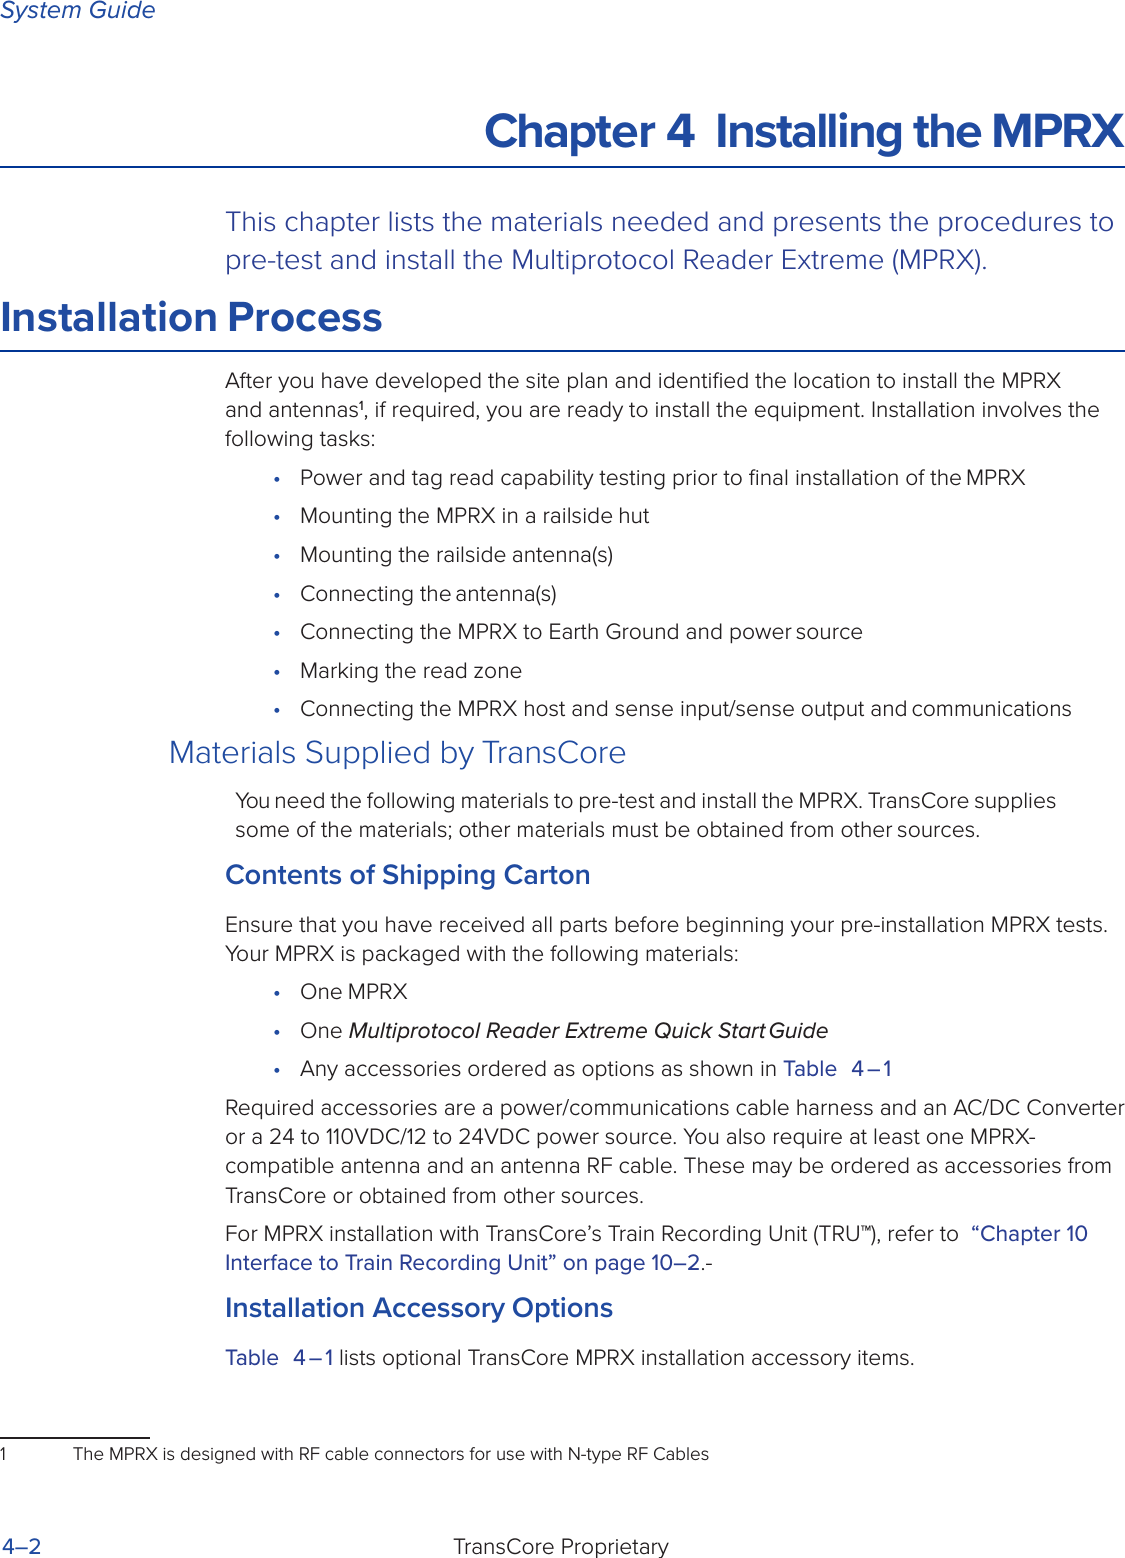 System GuideTransCore Proprietary4–2Chapter 4  Installing the MPRXThis chapter lists the materials needed and presents the procedures to pre-test and install the Multiprotocol Reader Extreme (MPRX).Installation ProcessAfter you have developed the site plan and identiﬁed the location to install the MPRX and antennas1, if required, you are ready to install the equipment. Installation involves the following tasks:•  Power and tag read capability testing prior to ﬁnal installation of the MPRX•  Mounting the MPRX in a railside hut•  Mounting the railside antenna(s)•  Connecting the antenna(s)•  Connecting the MPRX to Earth Ground and power source•  Marking the read zone•  Connecting the MPRX host and sense input/sense output and communicationsMaterials Supplied by TransCoreYou need the following materials to pre-test and install the MPRX. TransCore supplies some of the materials; other materials must be obtained from other sources.Contents of Shipping CartonEnsure that you have received all parts before beginning your pre-installation MPRX tests. Your MPRX is packaged with the following materials:•  One MPRX•  One Multiprotocol Reader Extreme Quick Start Guide•  Any accessories ordered as options as shown in Table 4 – 1Required accessories are a power/communications cable harness and an AC/DC Converter or a 24 to 110VDC/12 to 24VDC power source. You also require at least one MPRX-compatible antenna and an antenna RF cable. These may be ordered as accessories from TransCore or obtained from other sources.For MPRX installation with TransCore’s Train Recording Unit (TRU™), refer to  “Chapter 10  Interface to Train Recording Unit” on page 10–2.-Installation Accessory OptionsTable 4 – 1 lists optional TransCore MPRX installation accessory items.1  The MPRX is designed with RF cable connectors for use with N-type RF Cables